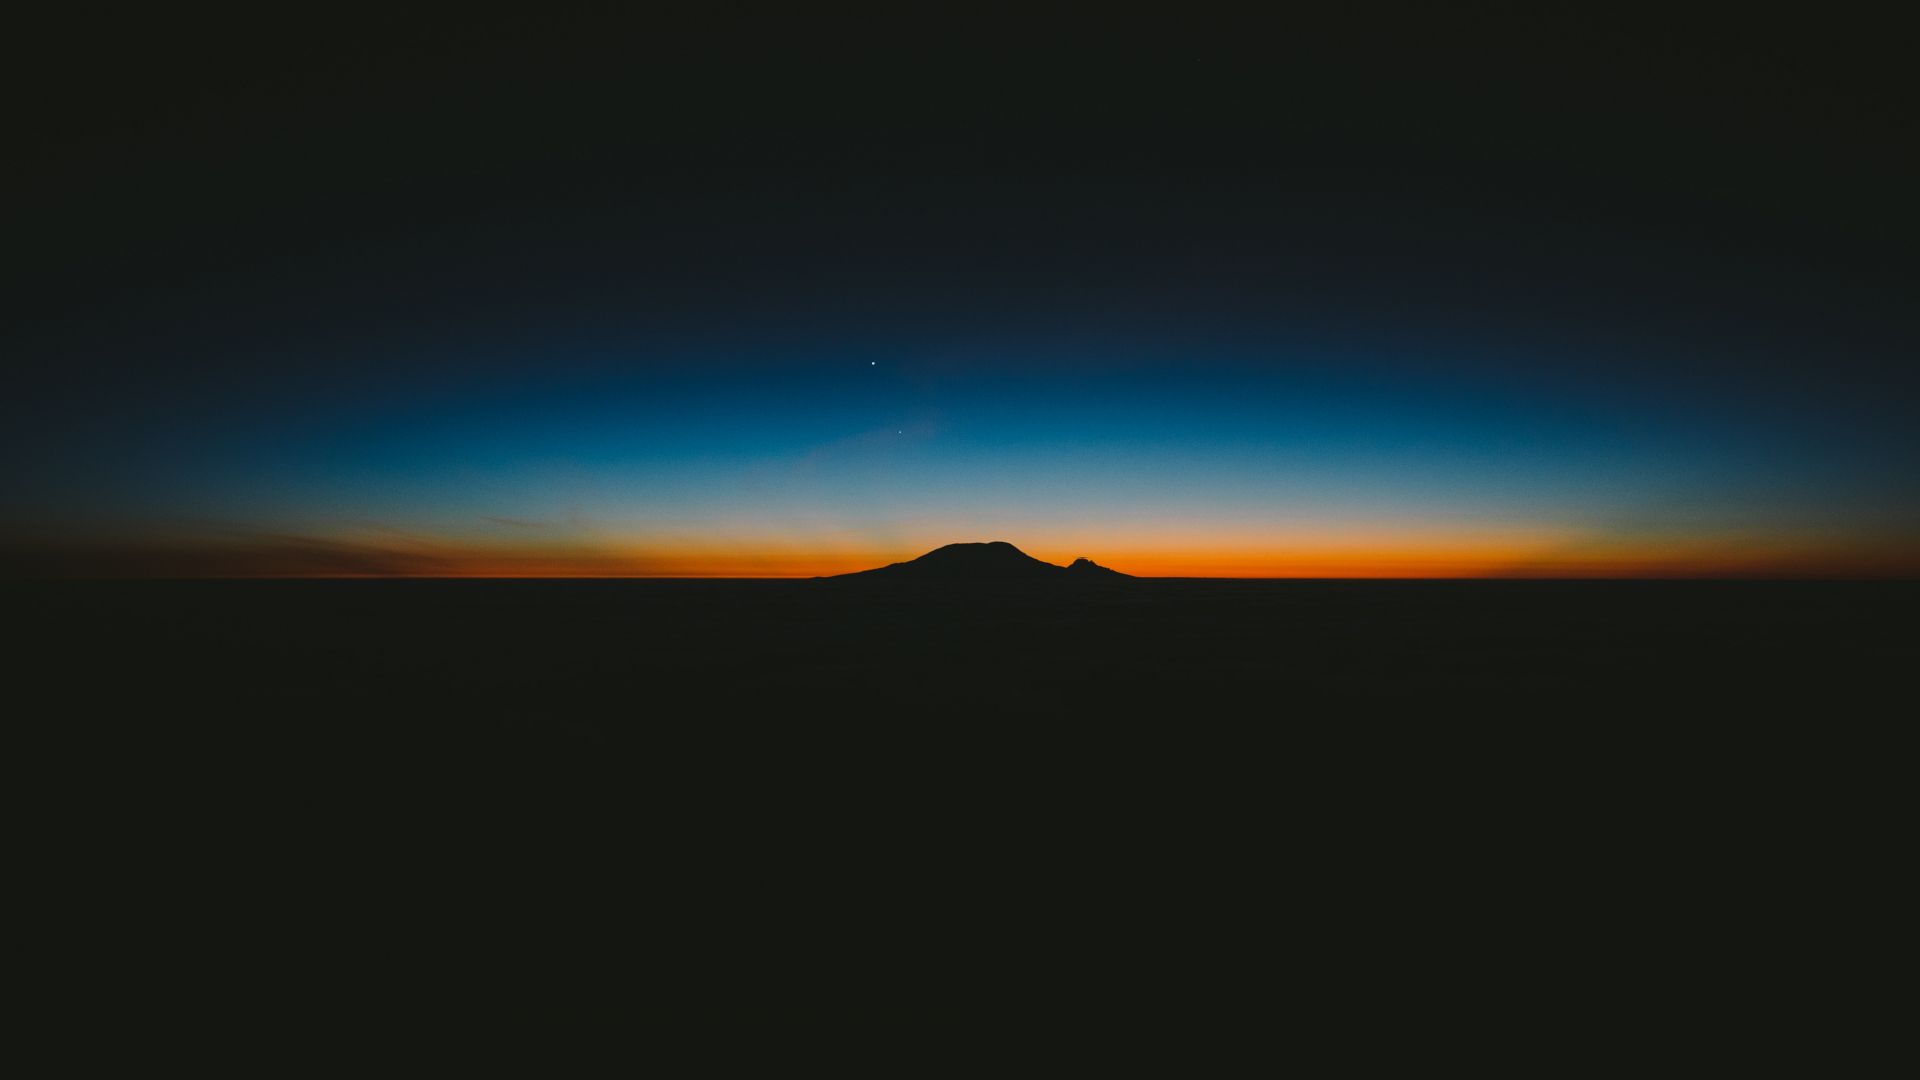 Best 500 Dawn Pictures  Download Free Images  Stock Photos on Unsplash